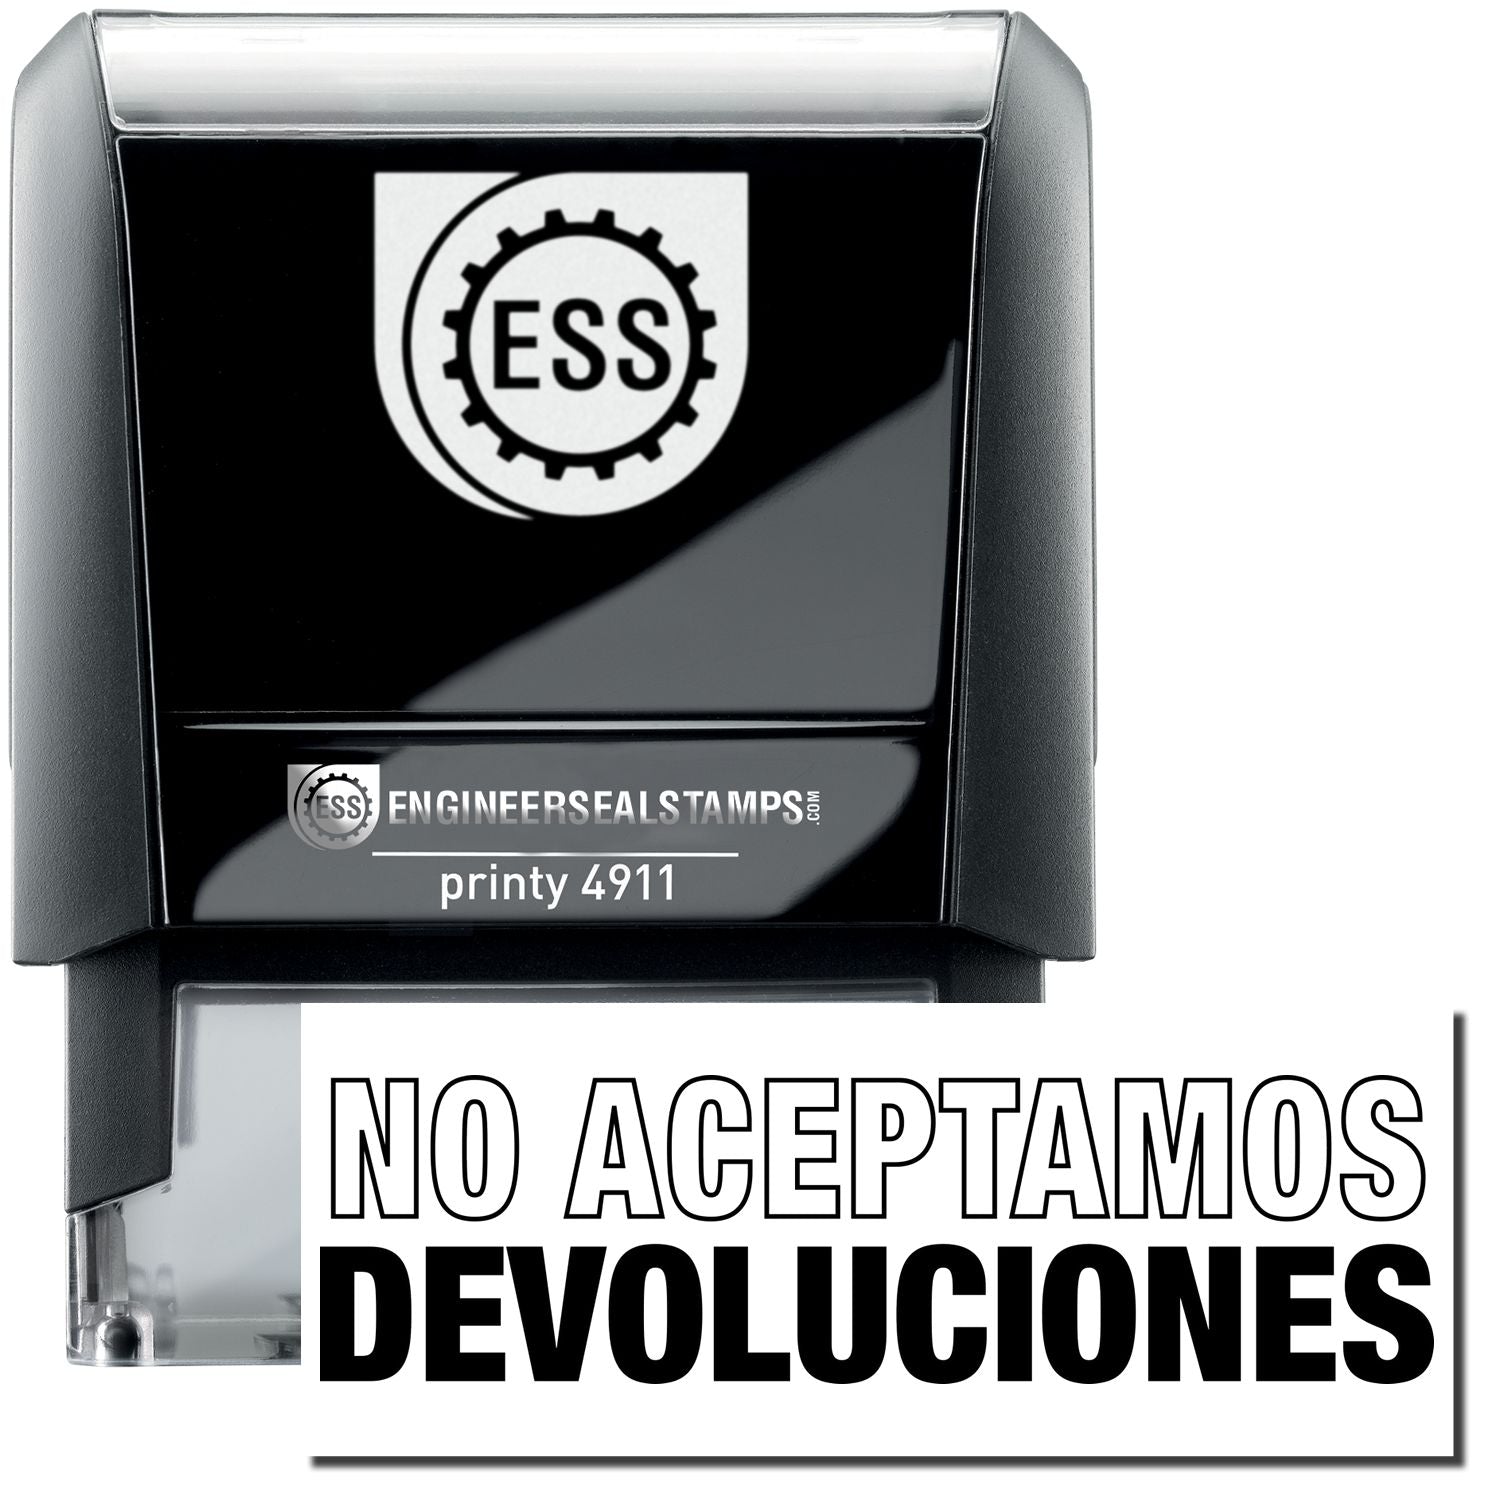 A self-inking stamp with a stamped image showing how the text "NO ACEPTAMOS DEVOLUCIONS" ("NO ACEPTAMOS" in an outline style and "DEVOLUCIONS" in bold font) is displayed after stamping.